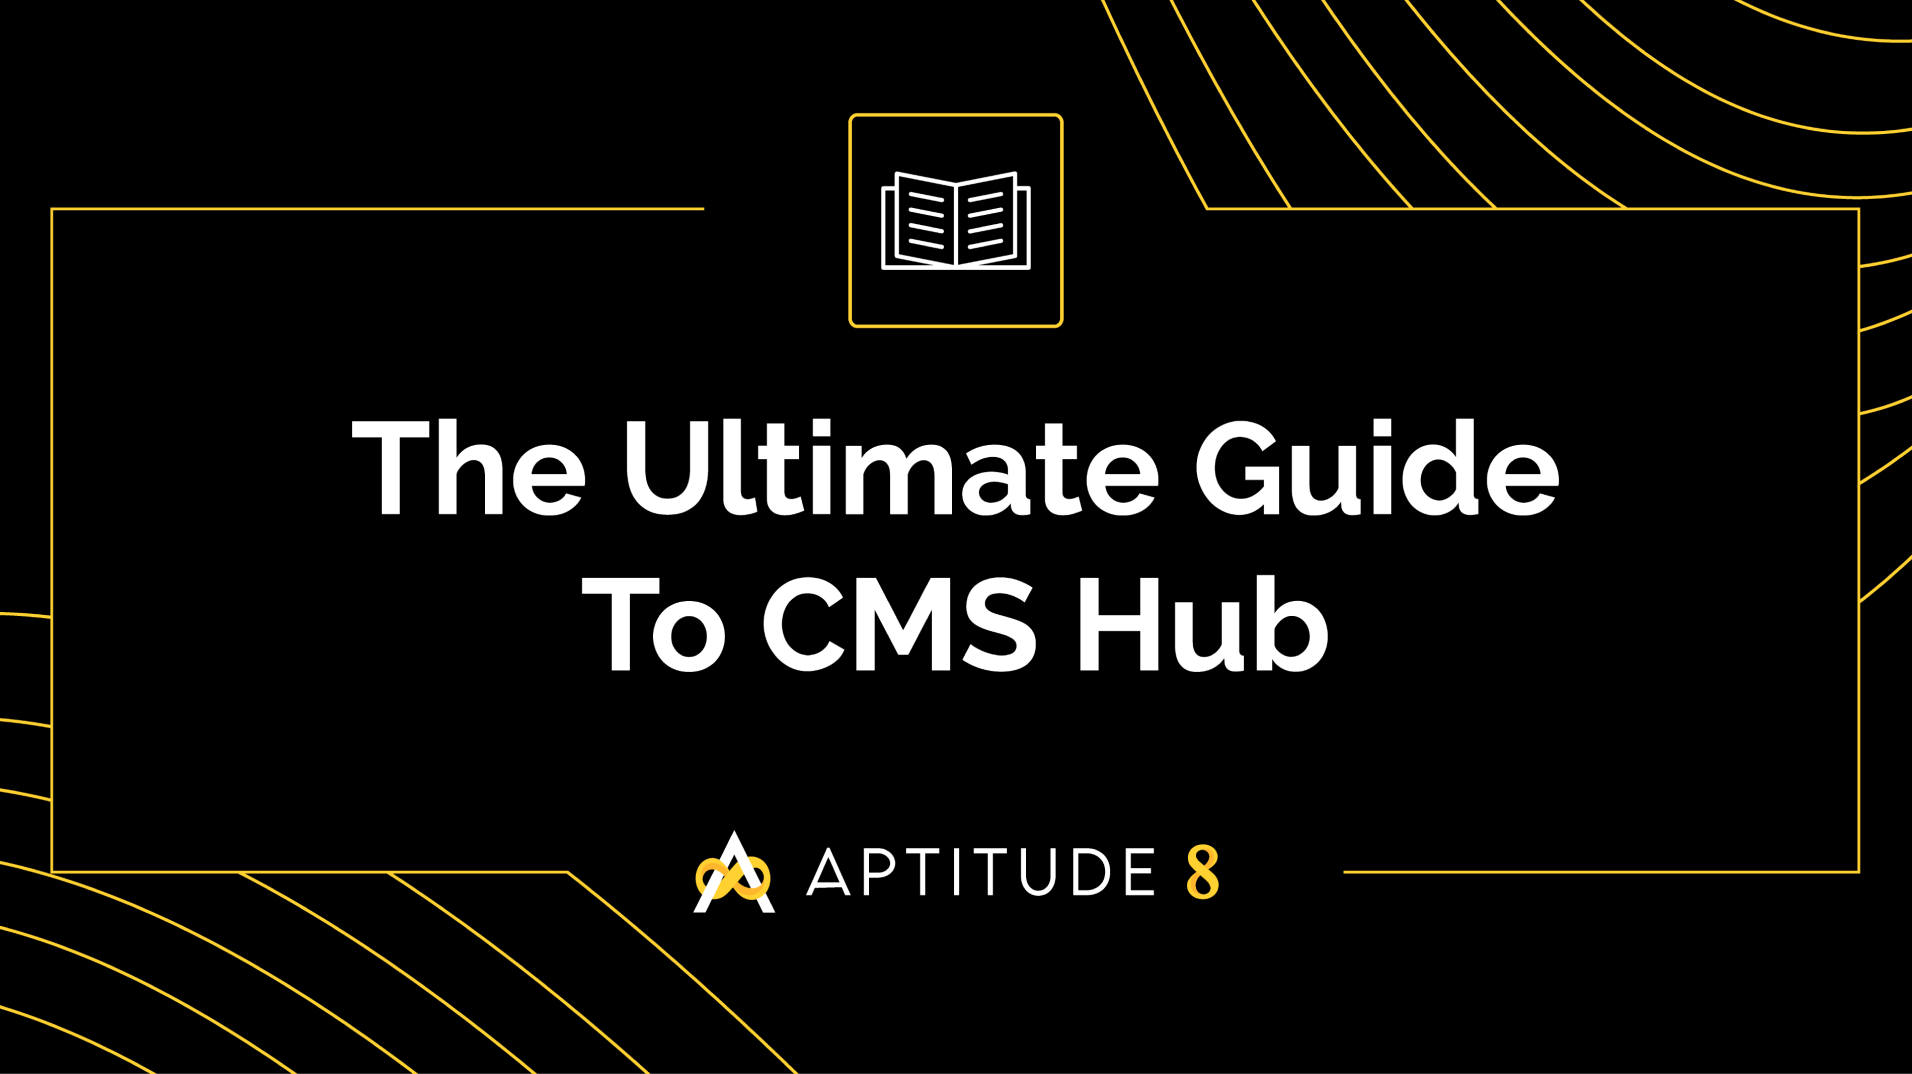 The Ultimate Guide to CMS Hub - Guide - Feature Image